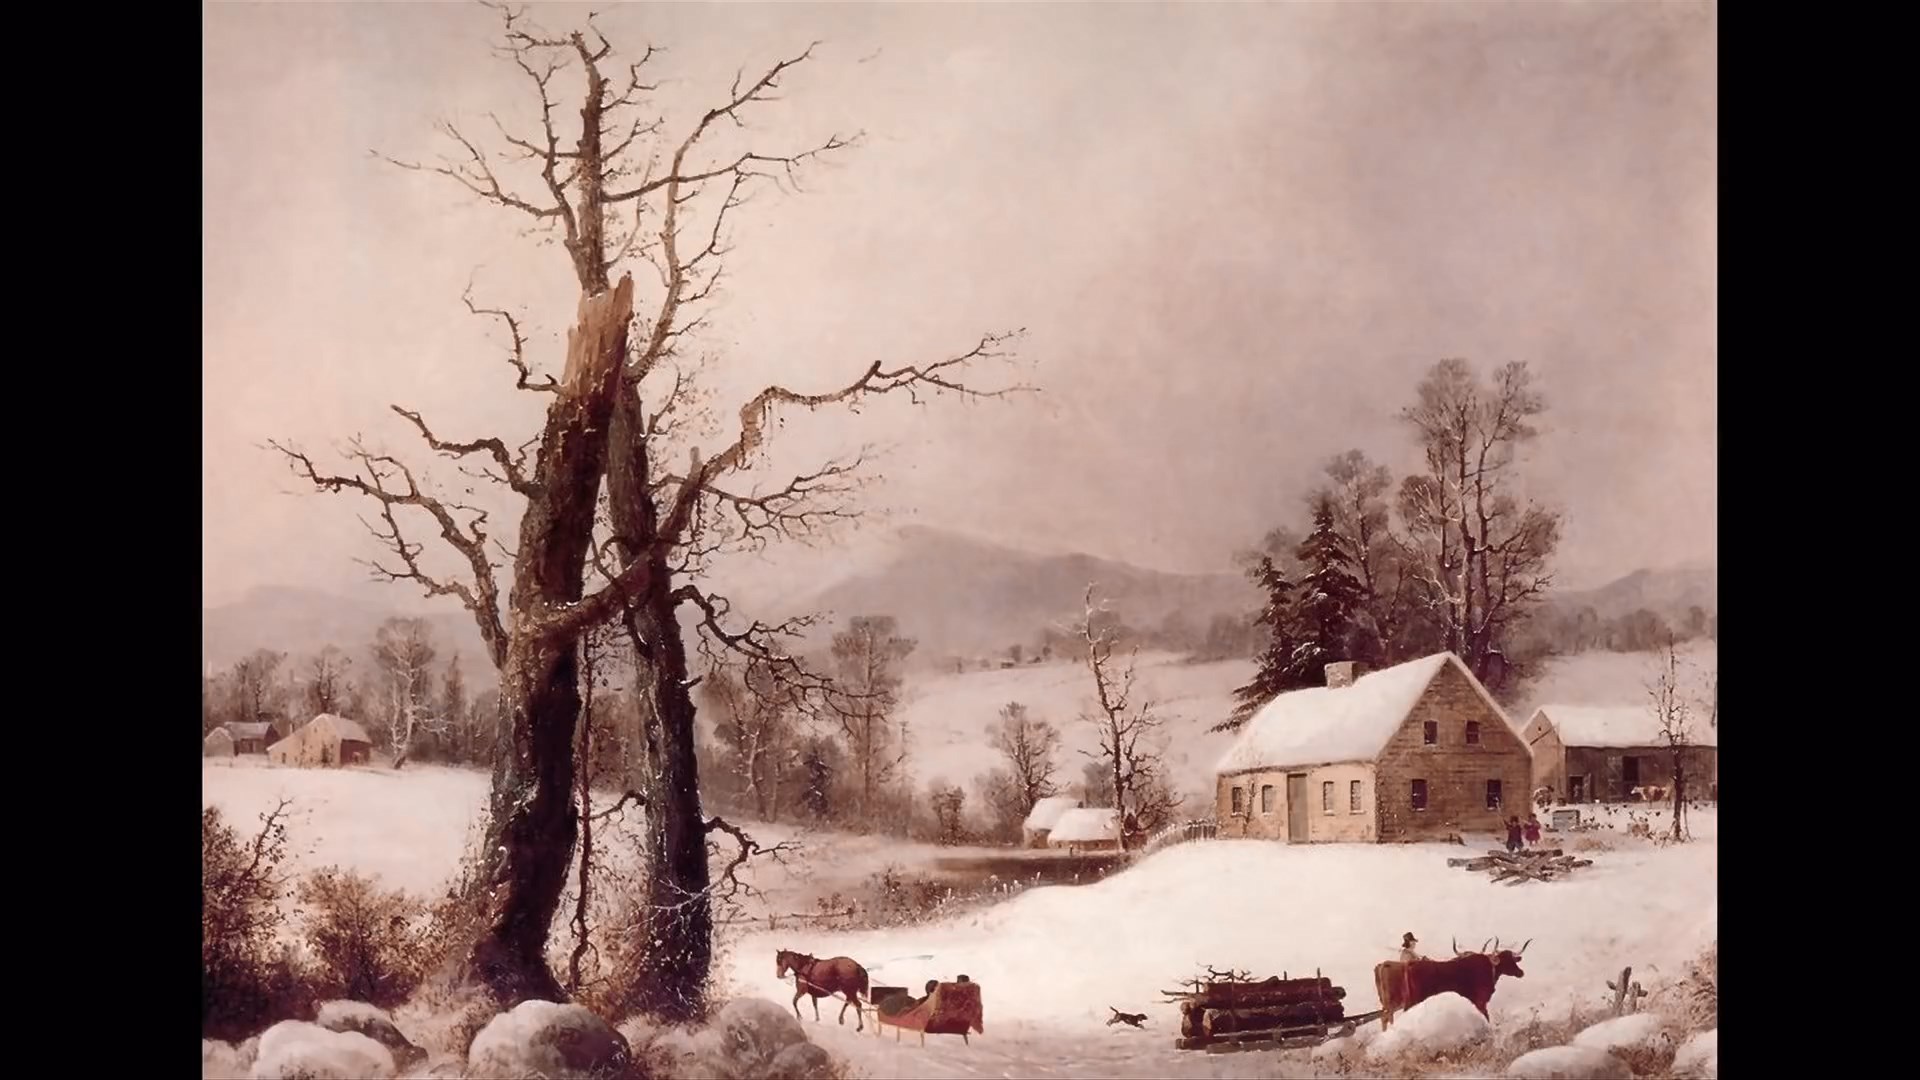 OLD FASHIONED CHRISTMAS AND WINTER SCENES e.jpg